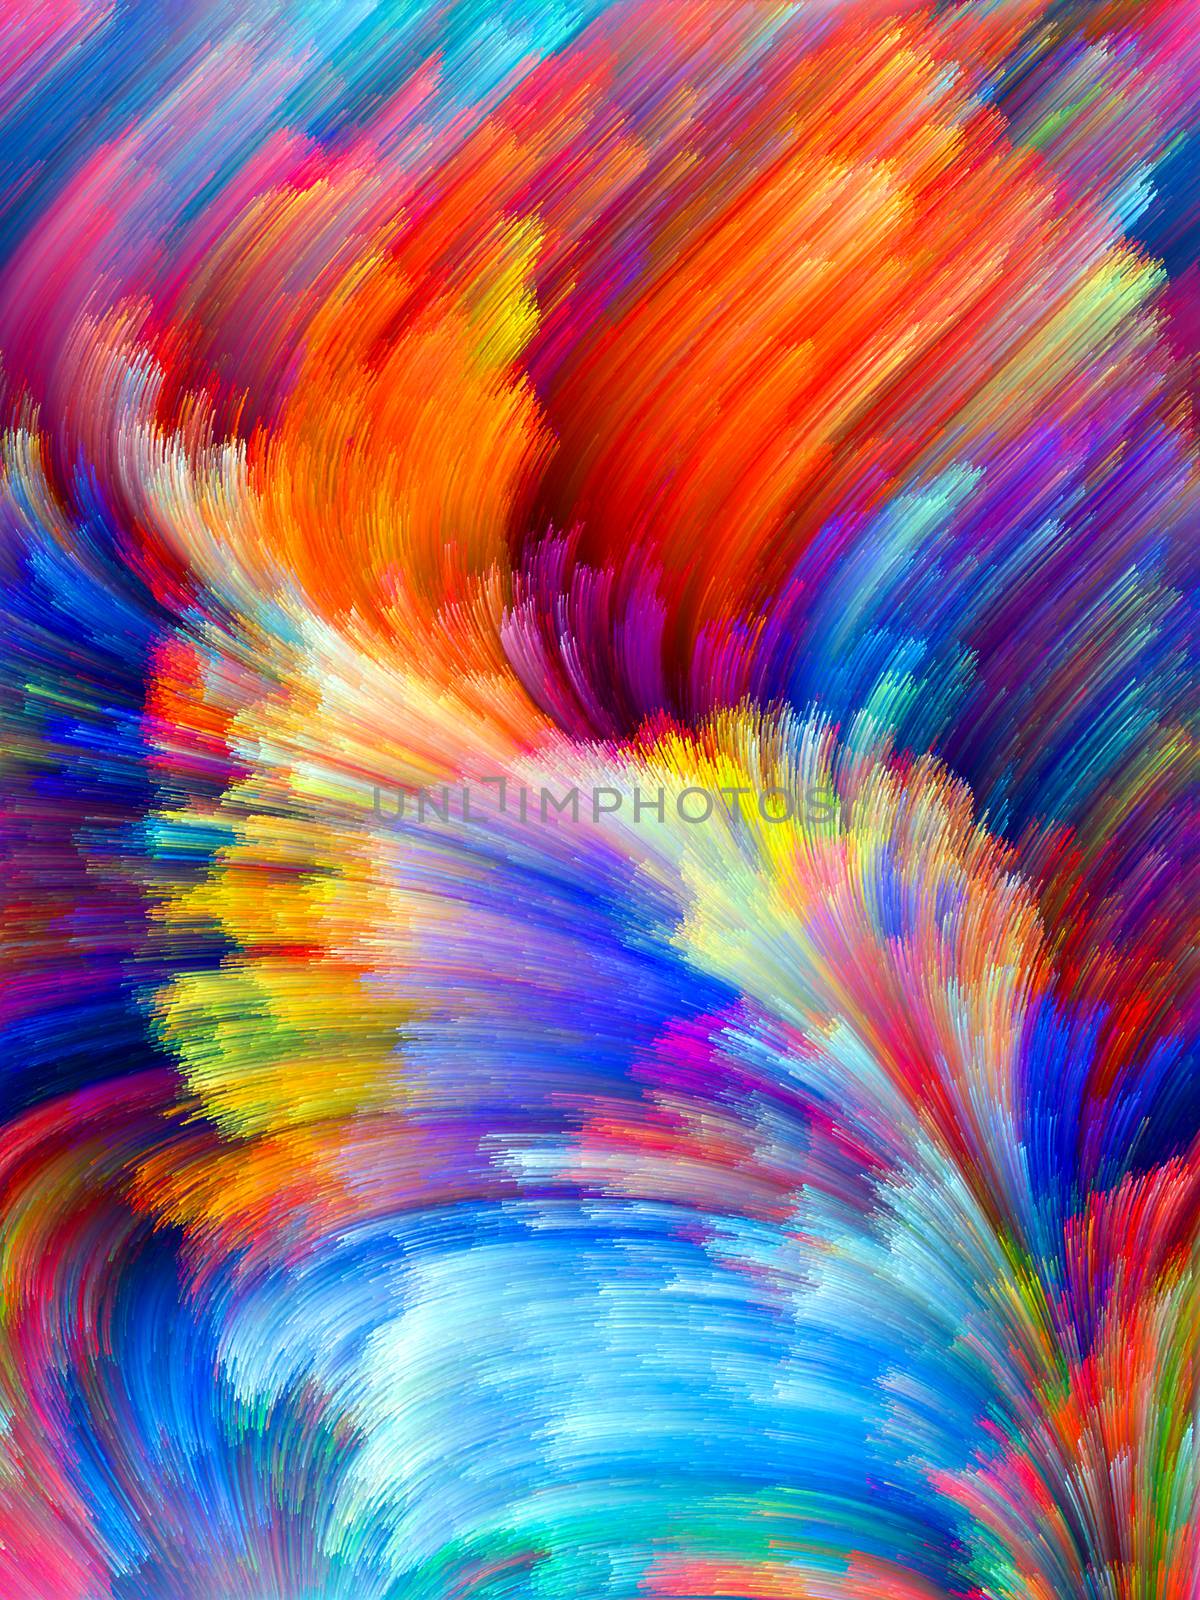 Colors In Bloom series. Abstract design made of fractal color textures on the subject of imagination, creativity and design